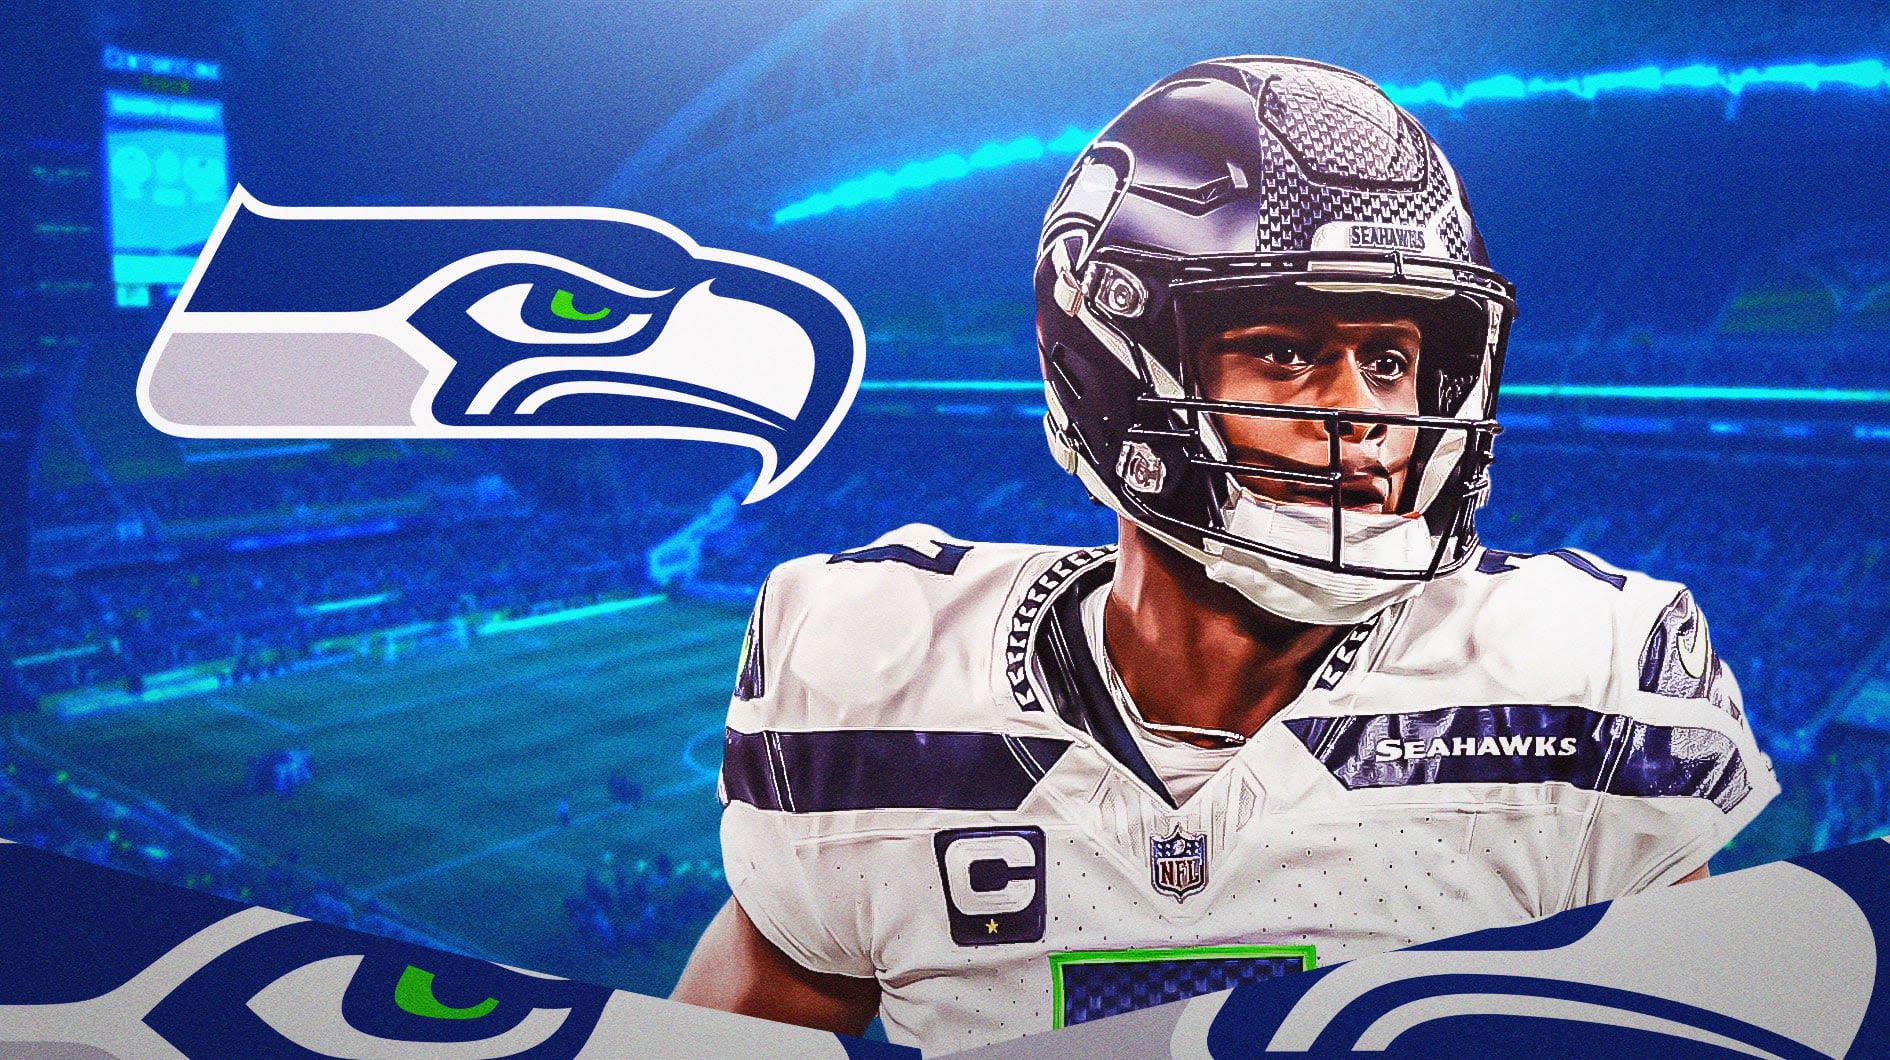 When will Seahawks' Geno Smith return to practice?